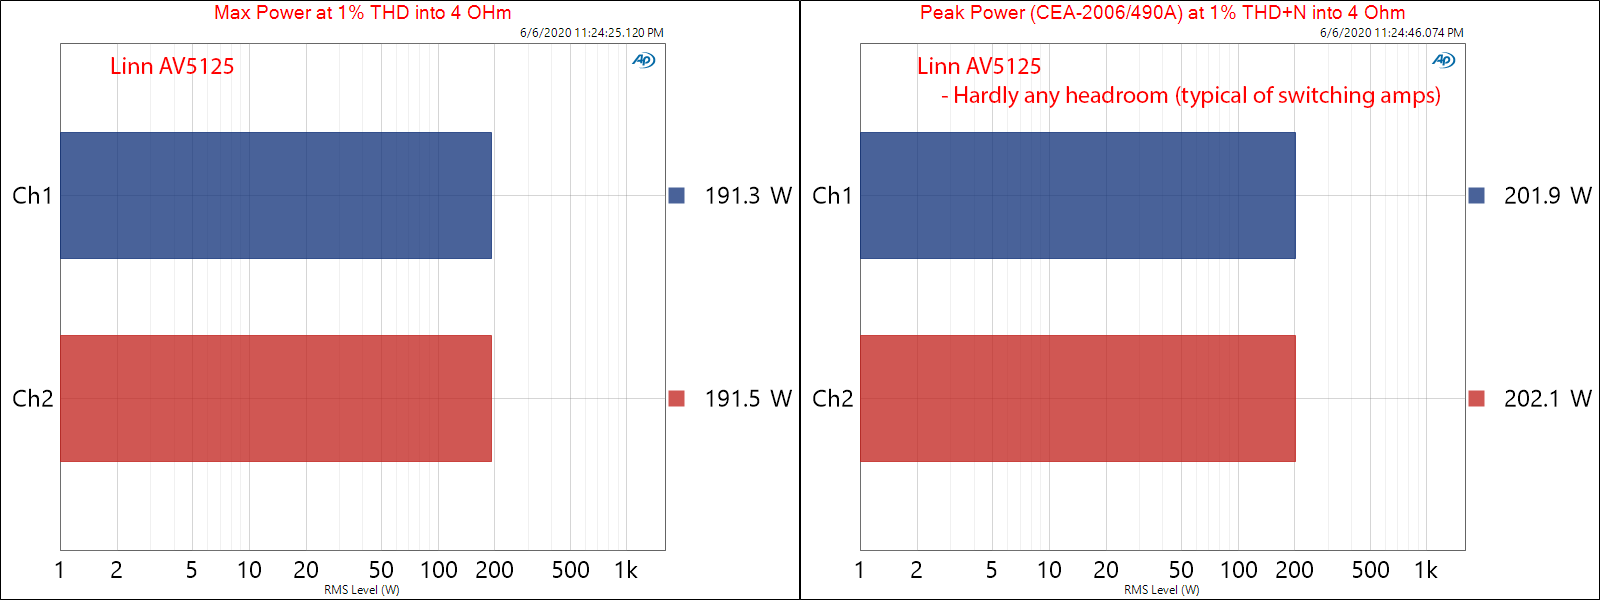 Linn AV5125 4-channel amplifier Power into 4 ohm Max and Peak Power Audio Measurements.png